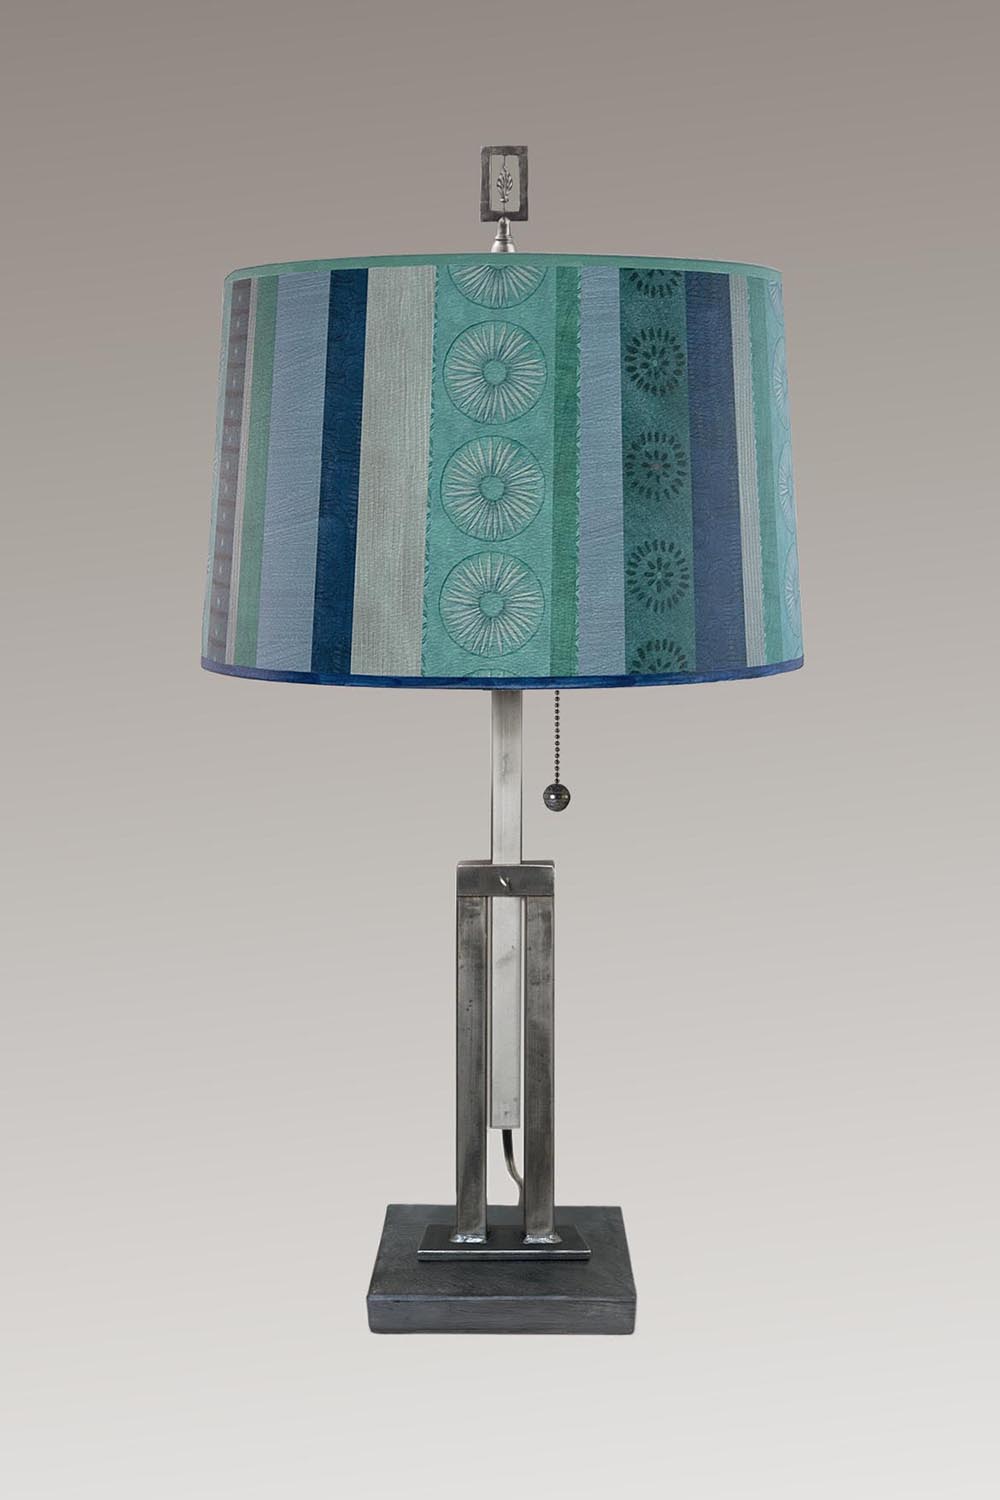 Janna Ugone &amp; Co Table Lamps Adjustable-Height Steel Table Lamp with Large Drum Shade in Serape Waters